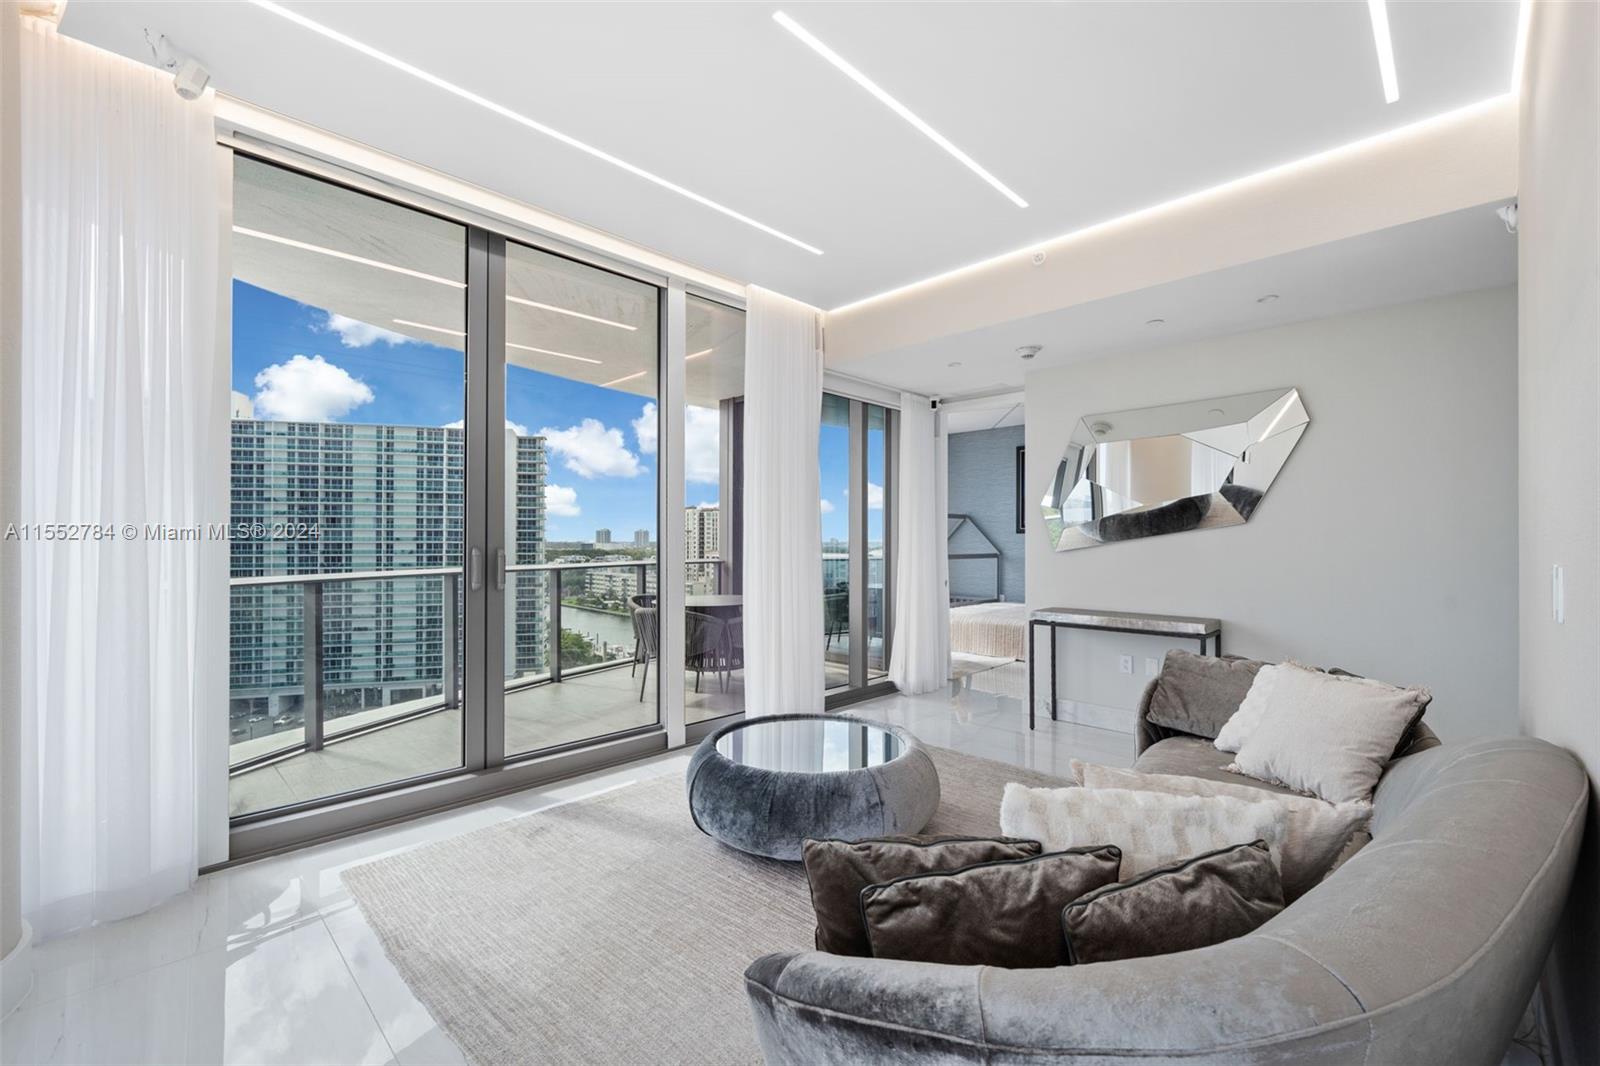 15701 Collins Ave 905, Sunny Isles Beach, Florida 33160, 4 Bedrooms Bedrooms, ,5 BathroomsBathrooms,Residential,For Sale,15701 Collins Ave 905,A11552784